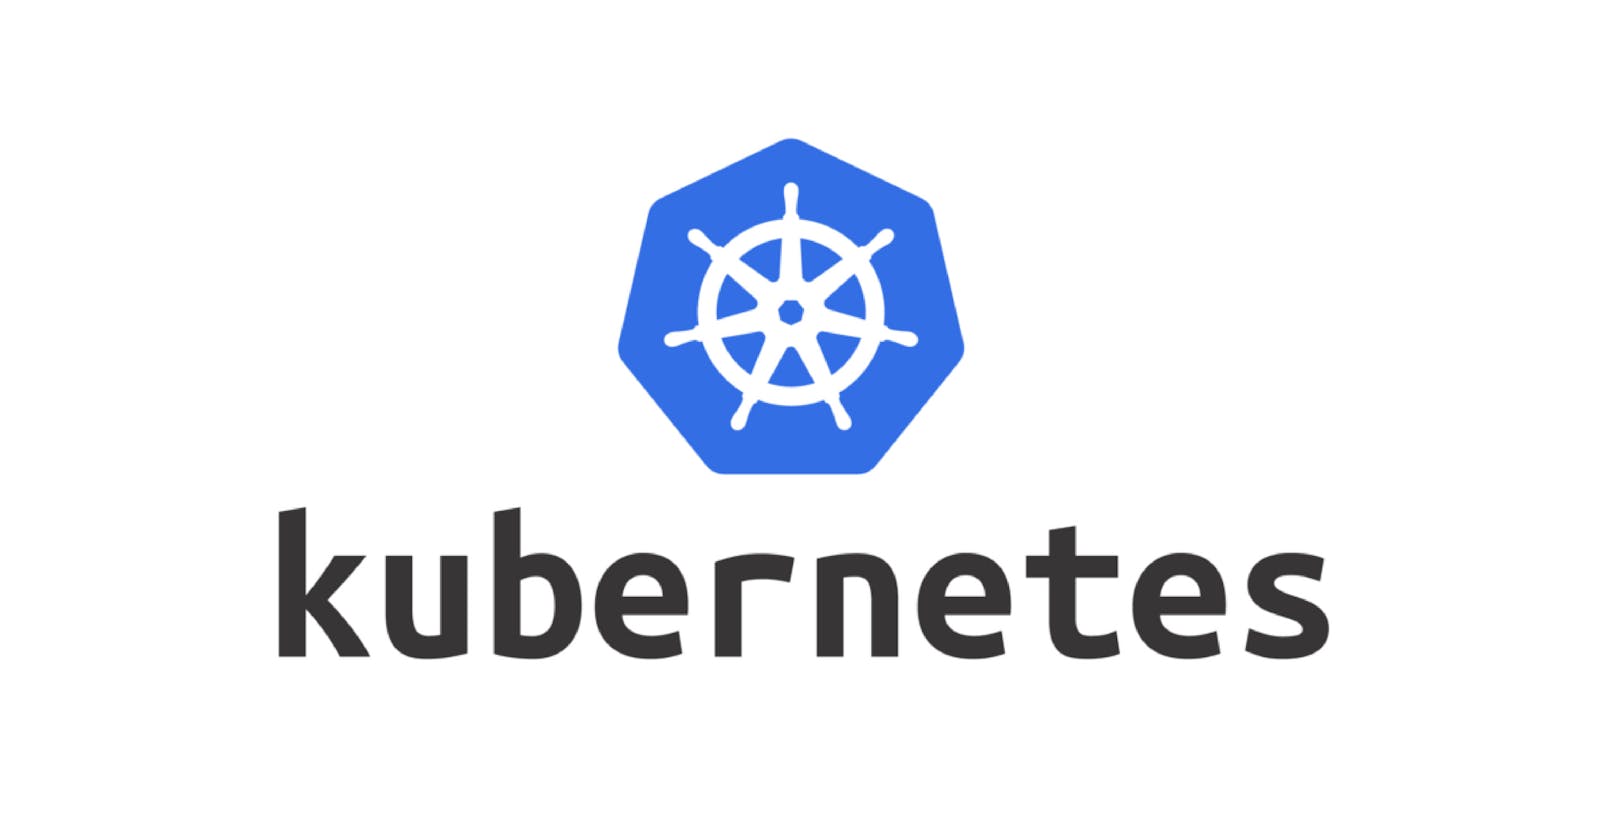 Service Discovery on Kubernetes